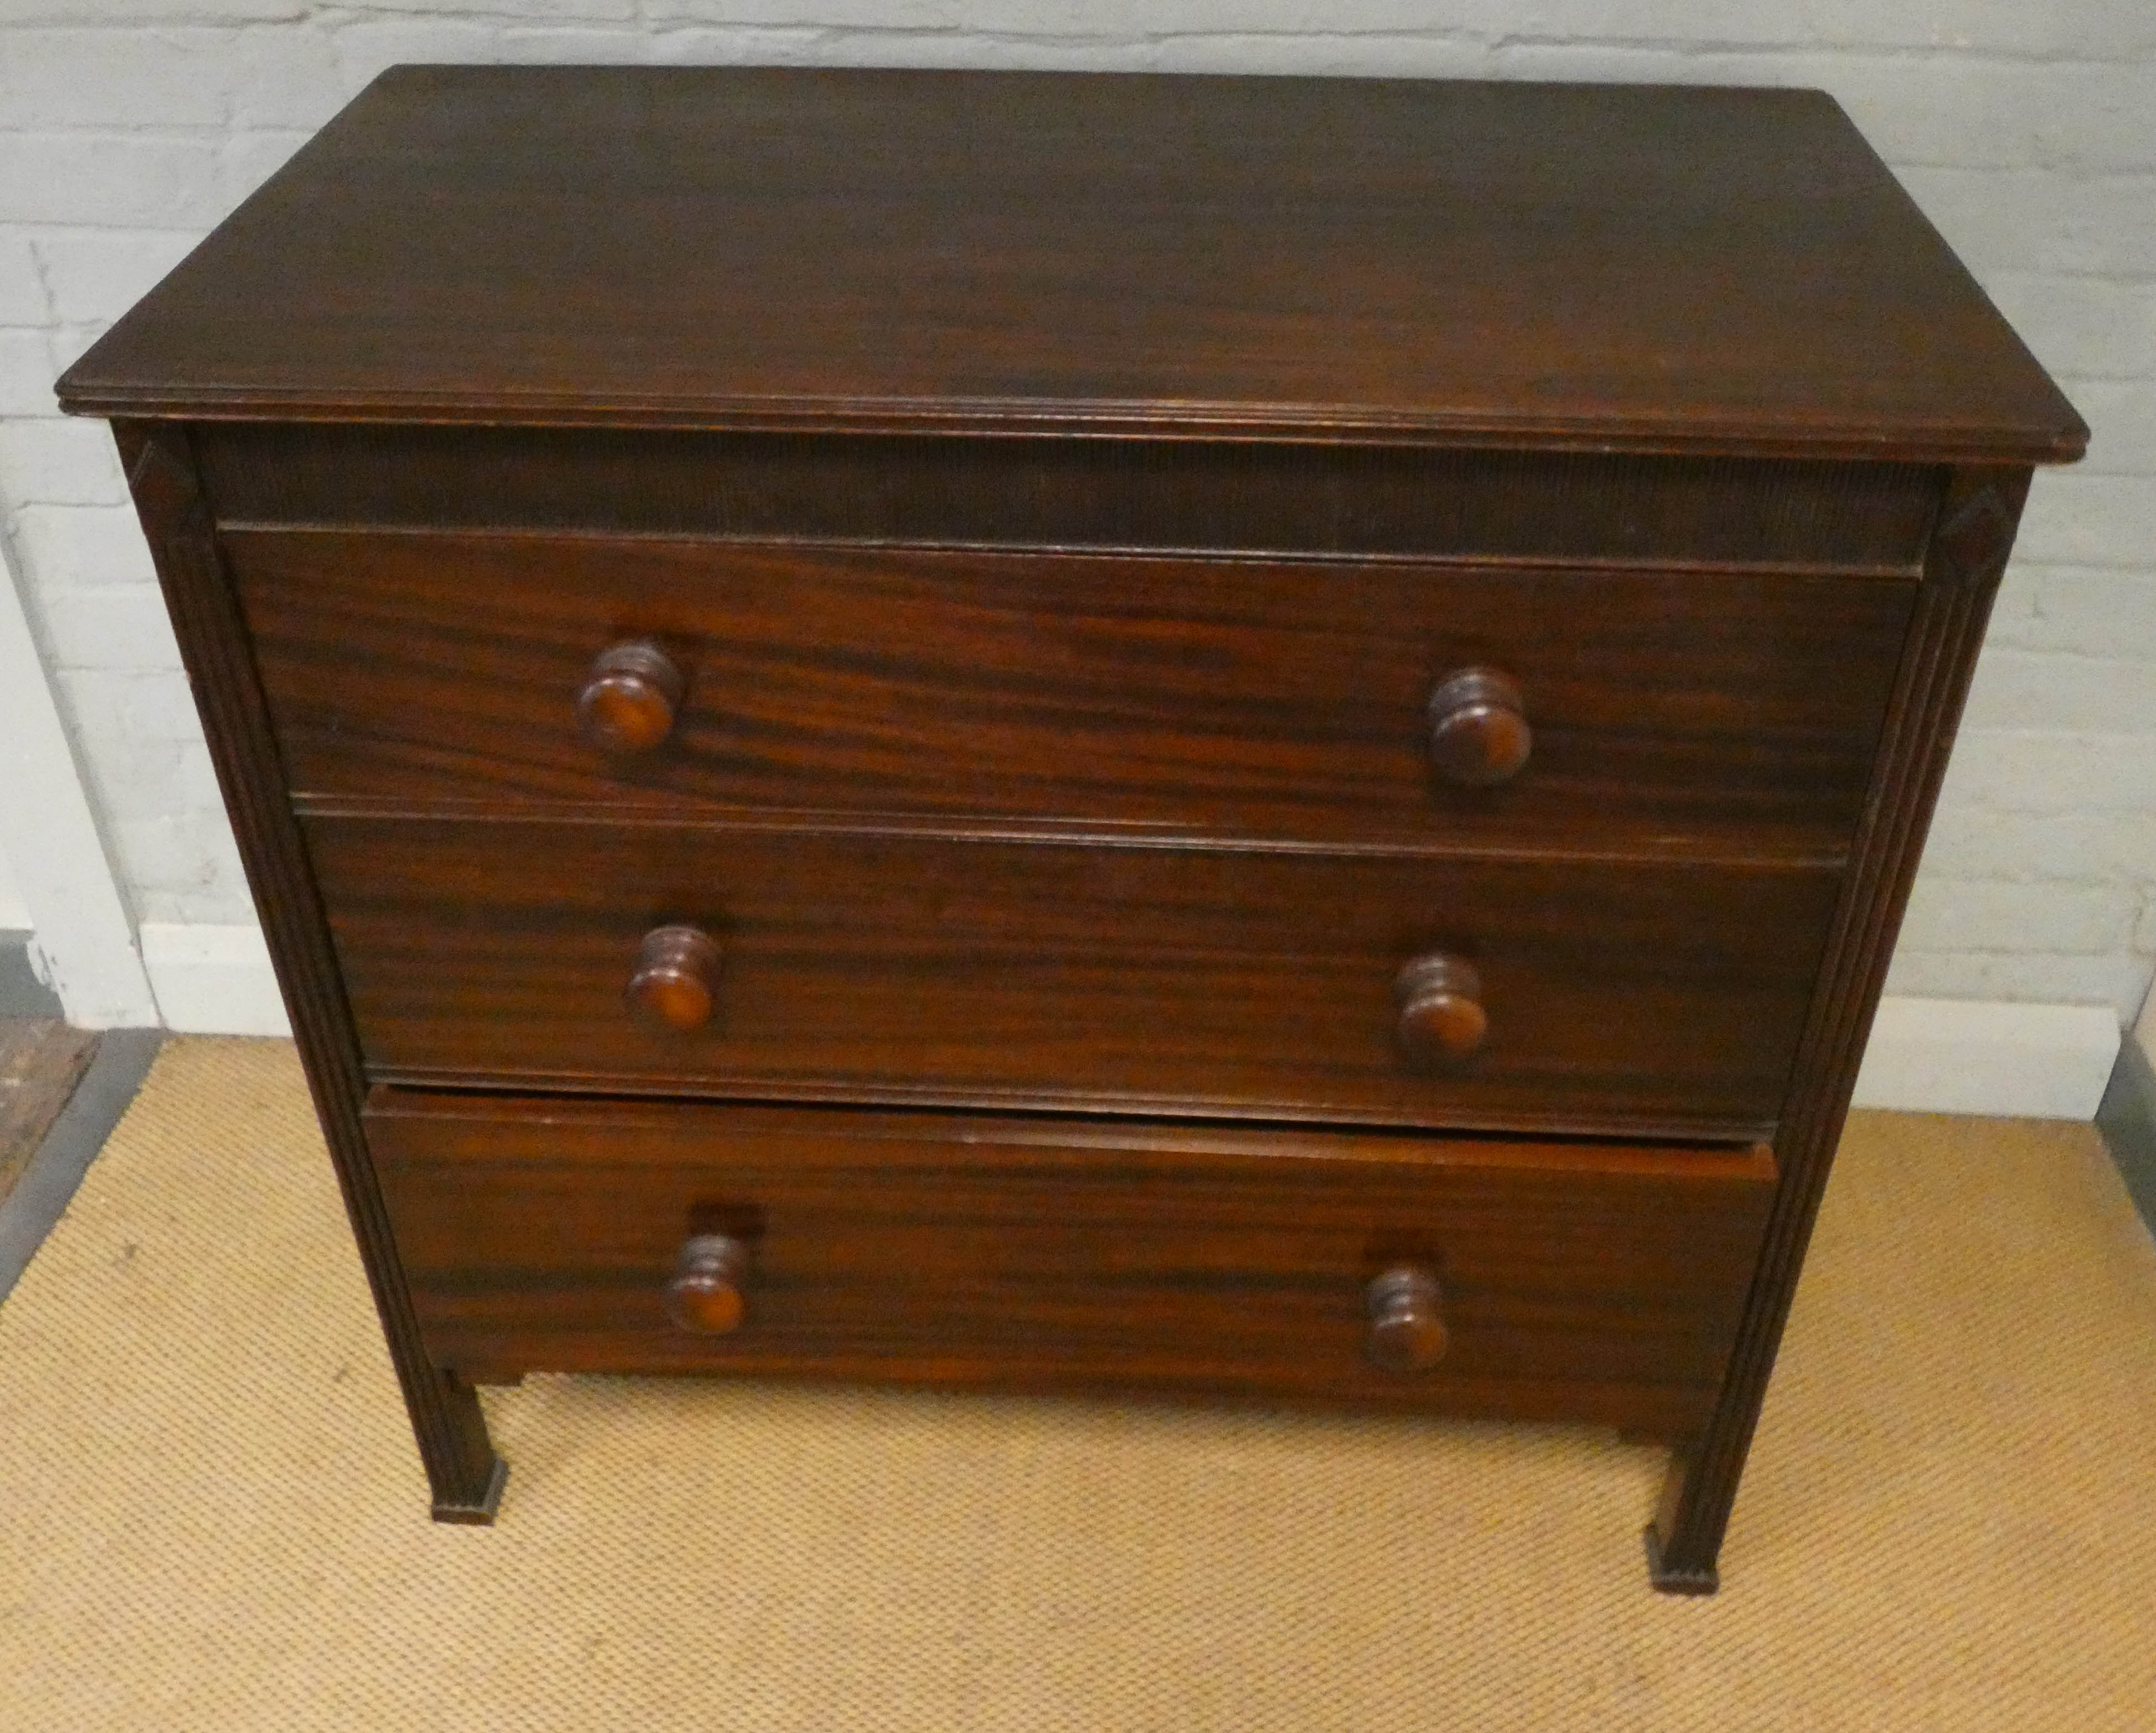 Victorian mahogany chest of three long drawers with bun handles standing on reeded style legs - Image 2 of 2